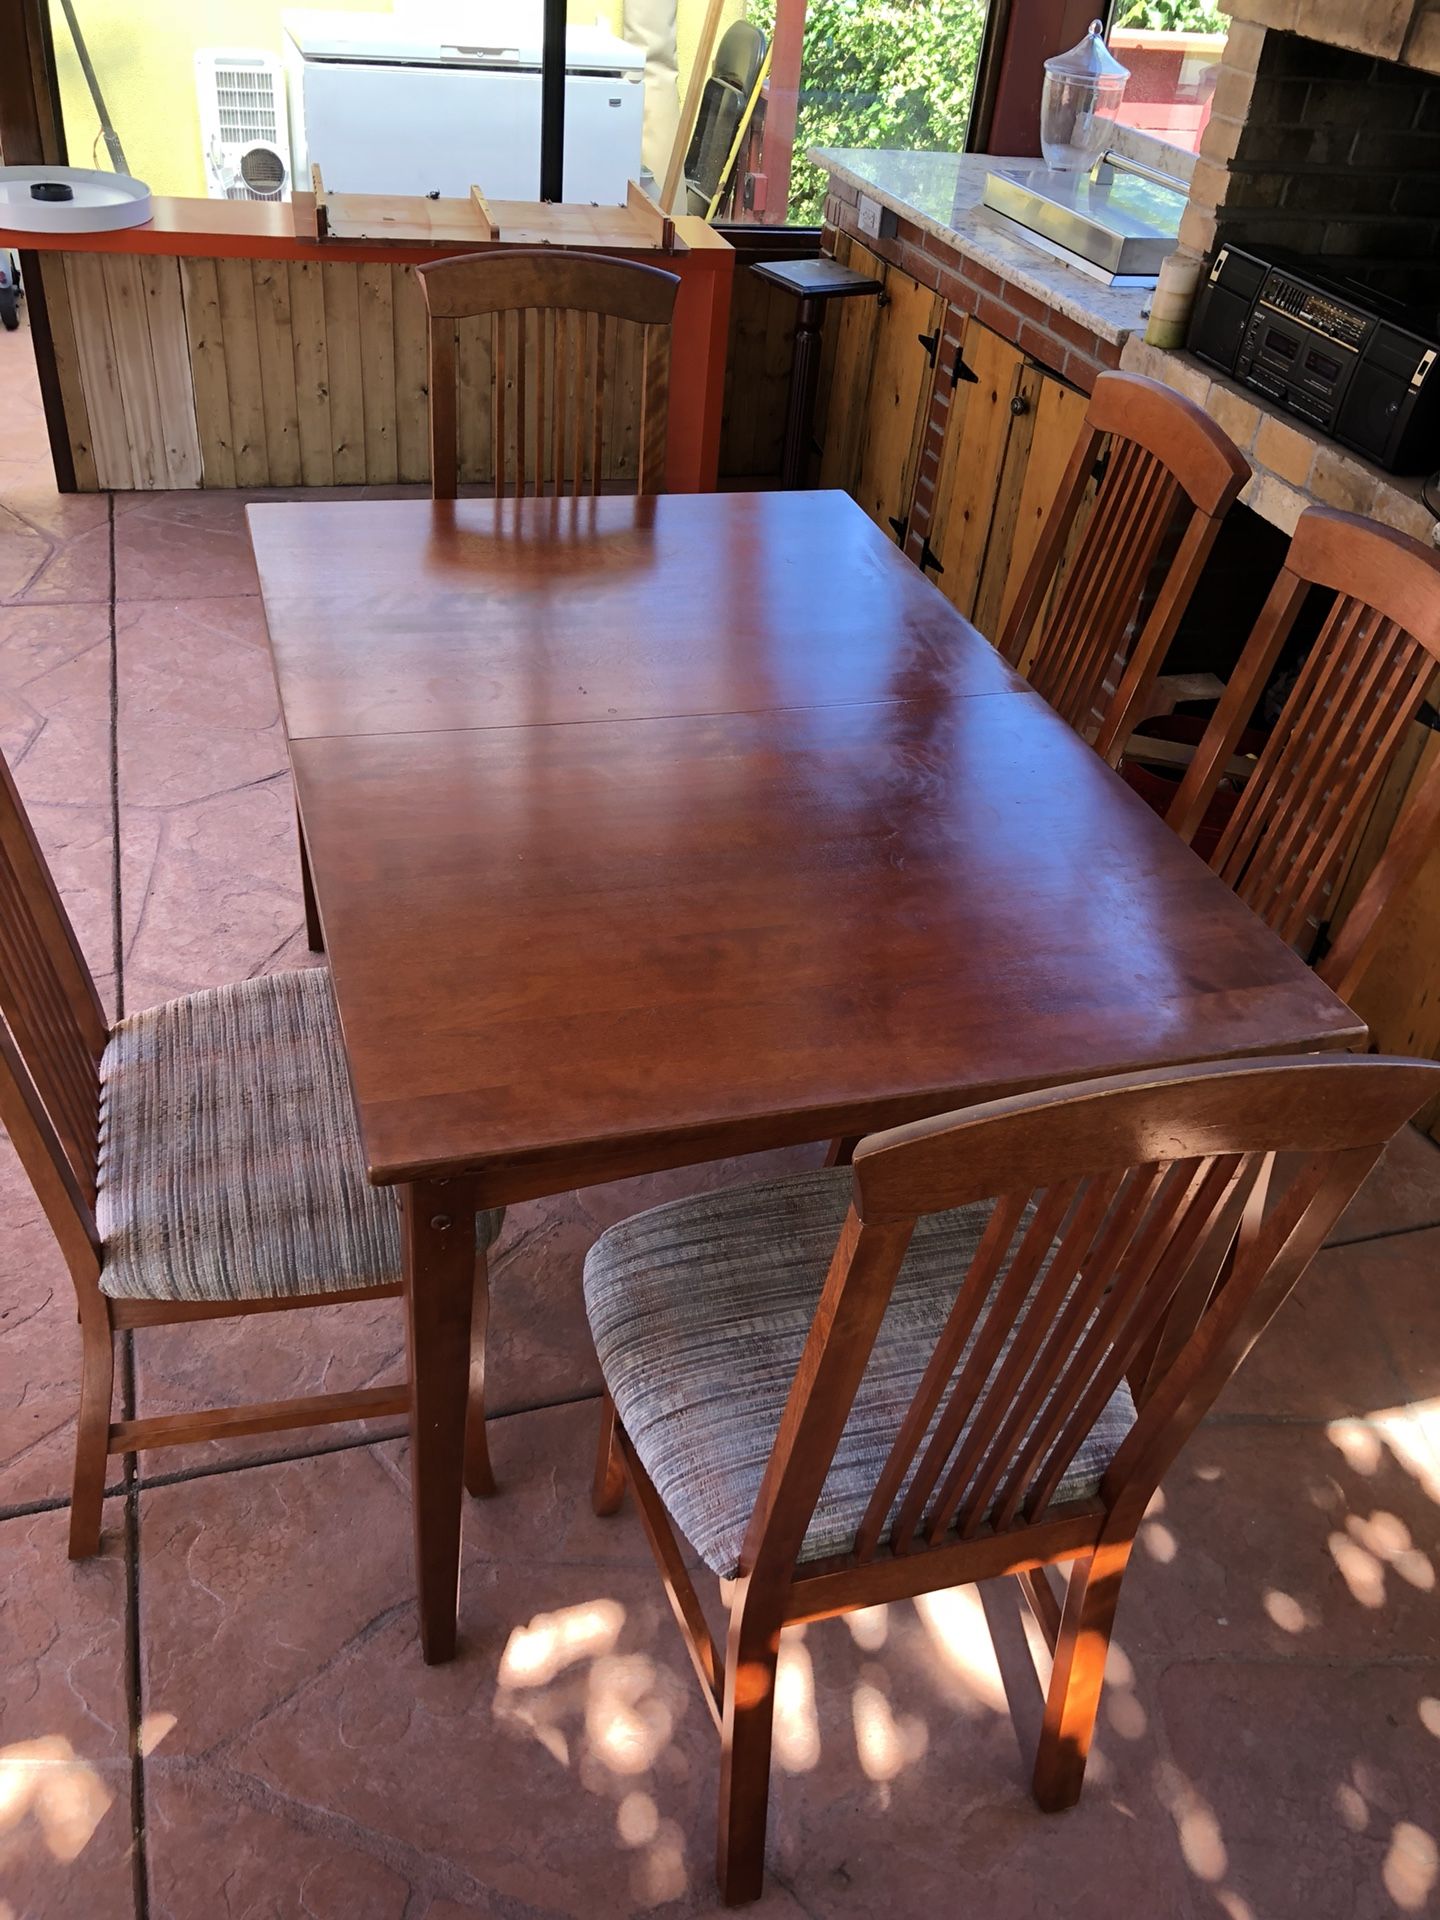 Nice cherry kitchen table and 5 chairs